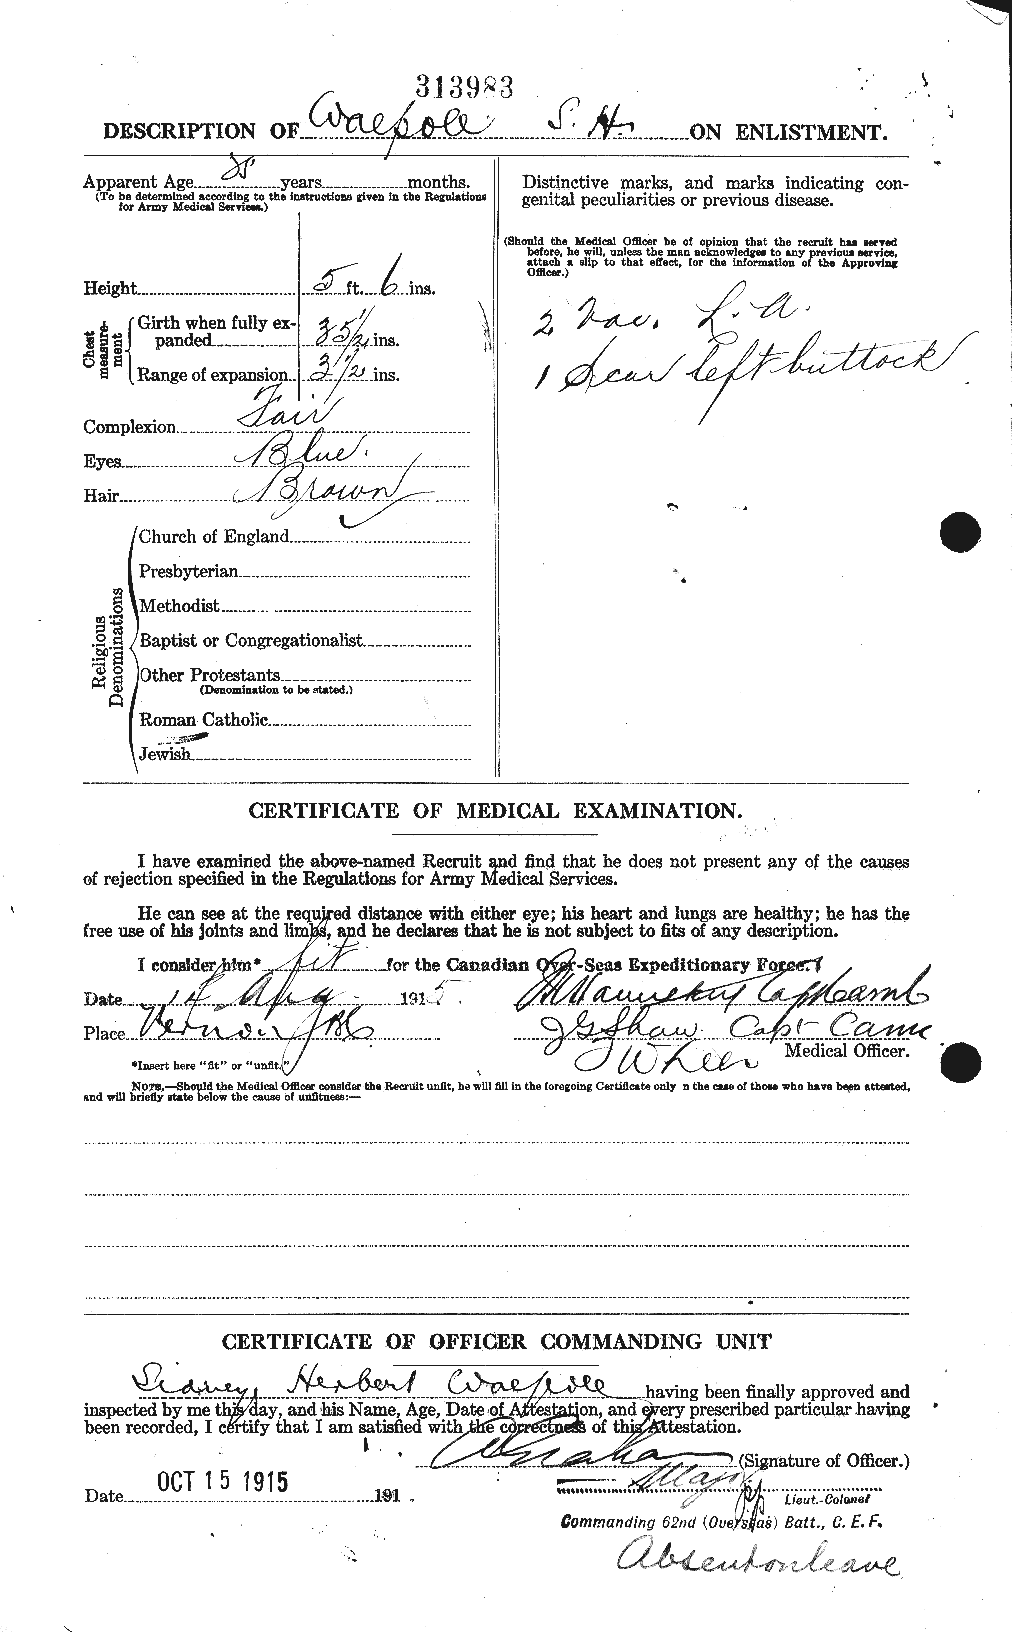 Personnel Records of the First World War - CEF 652639b